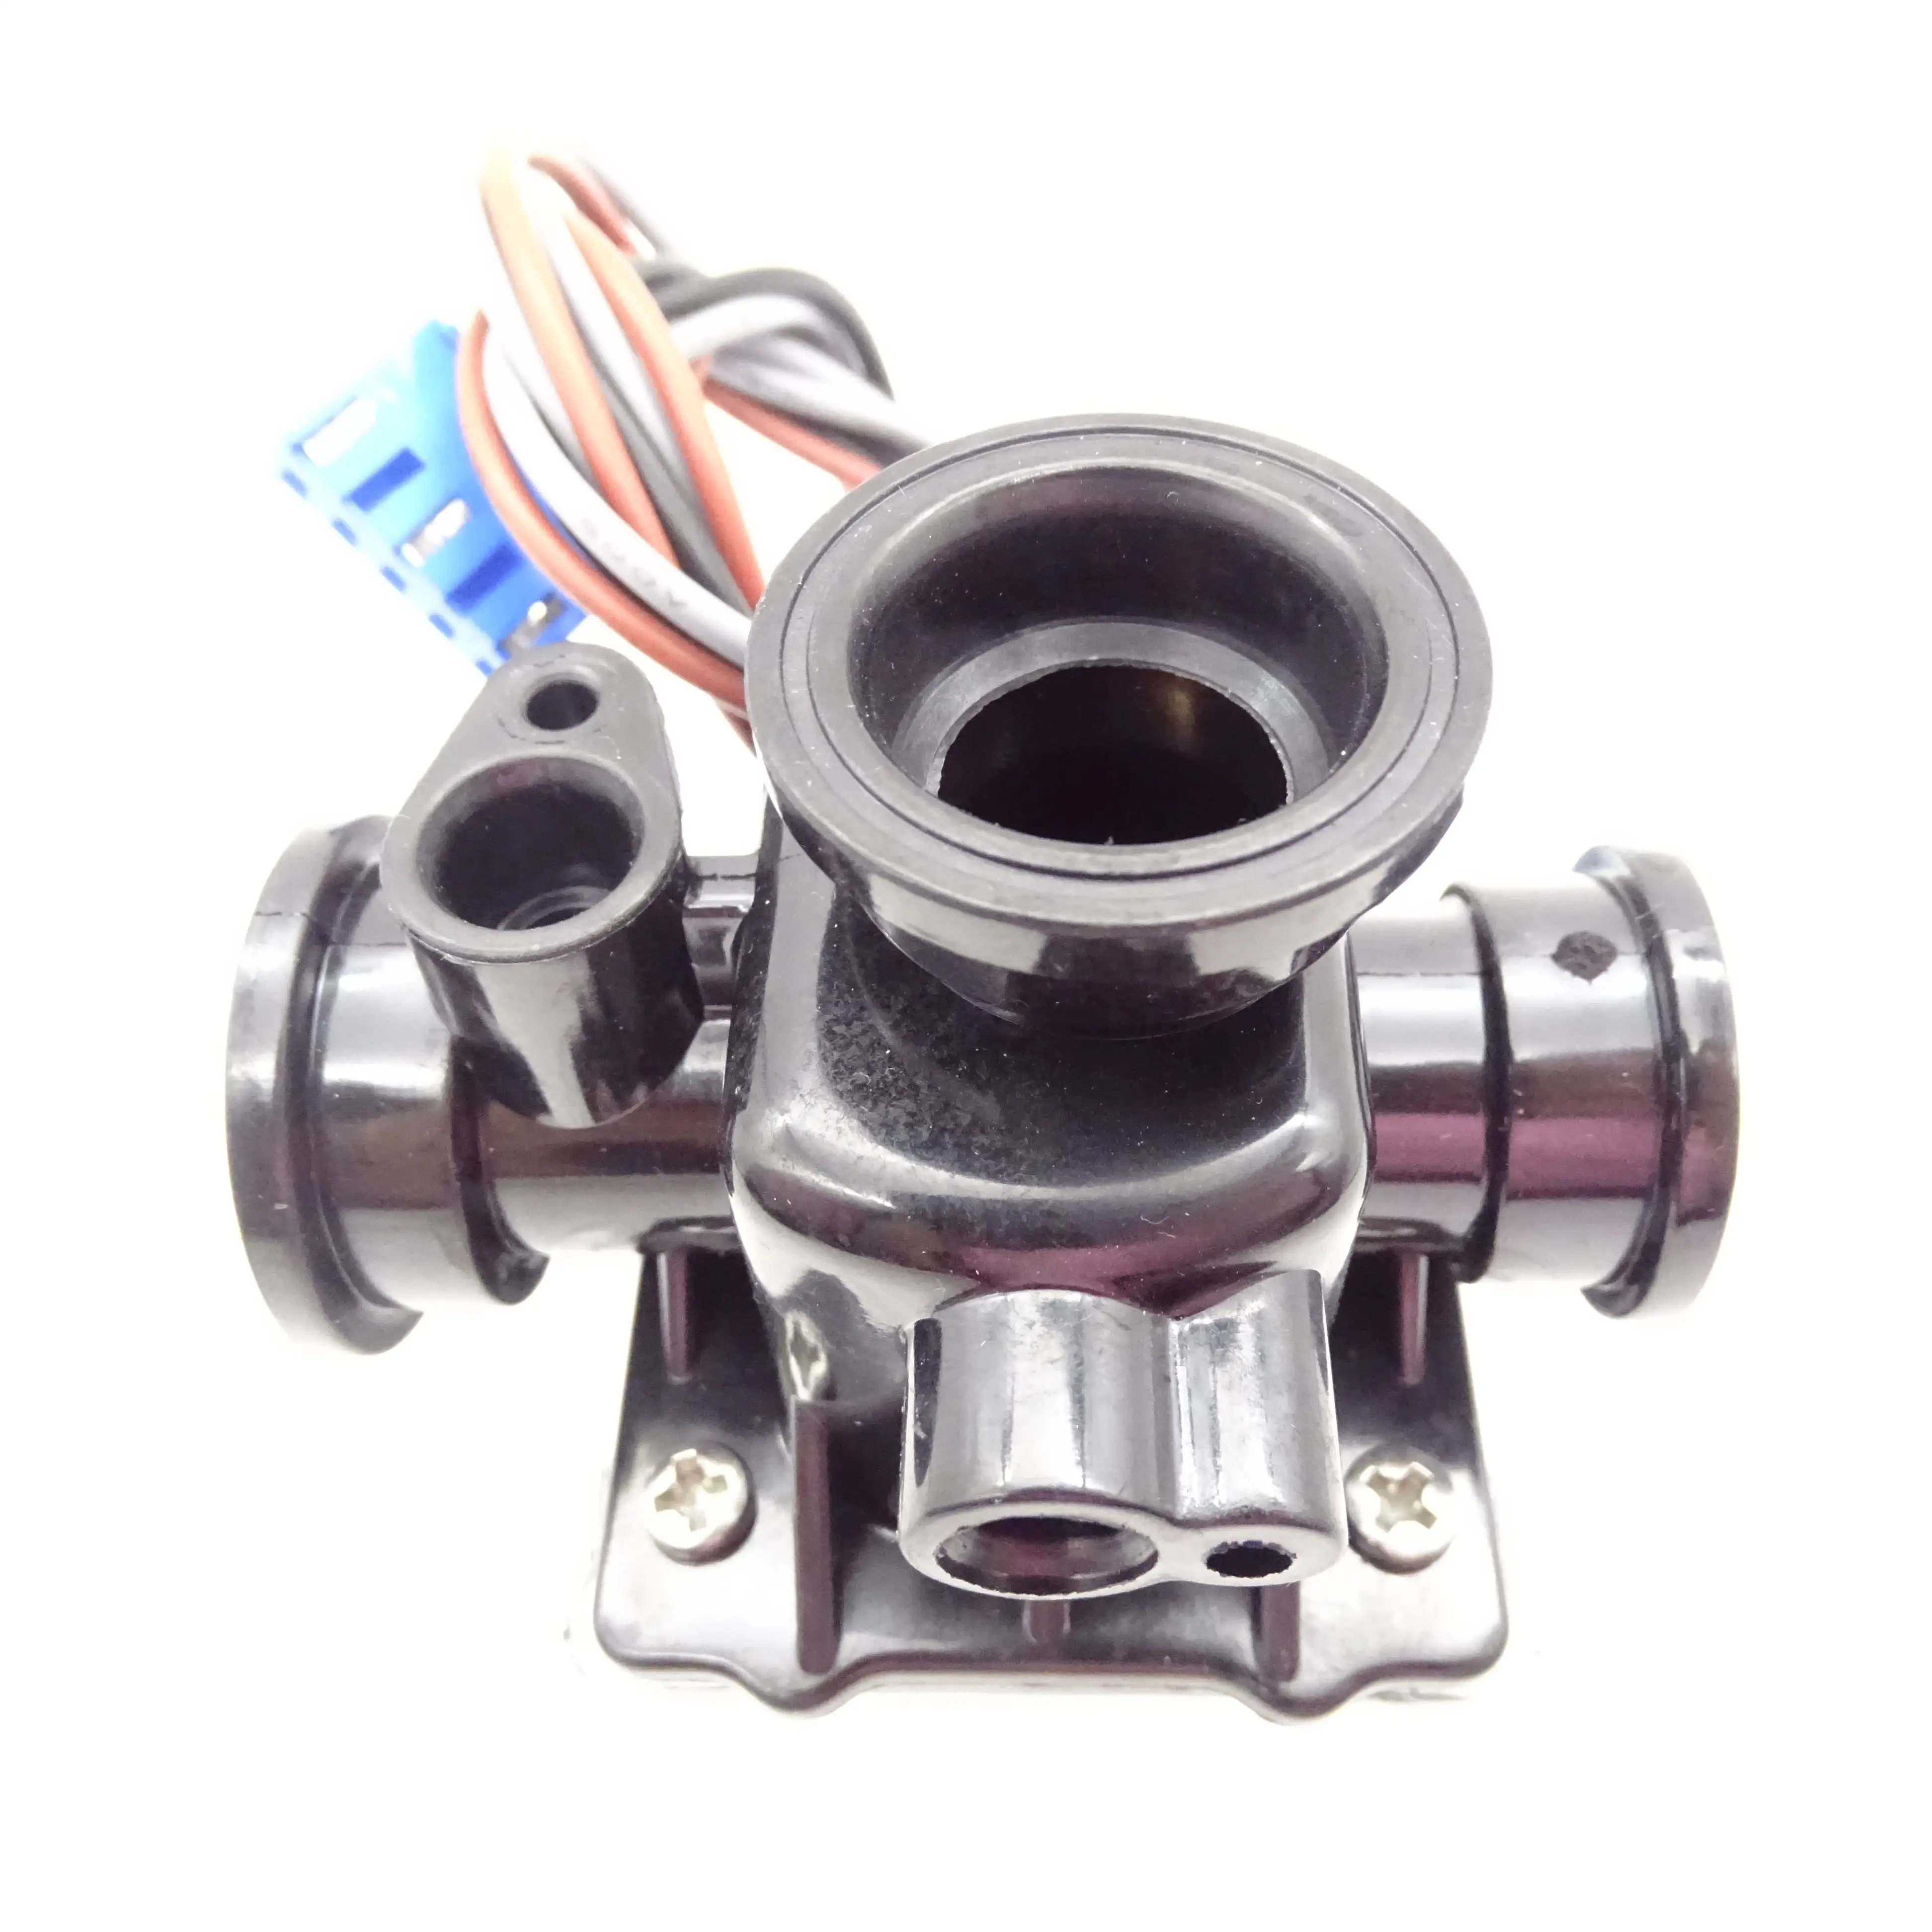 Gas Boiler Parts Wall-mounted Boiler Accessories Board Switch Plastic Three-way Motor Valve For Kiturami